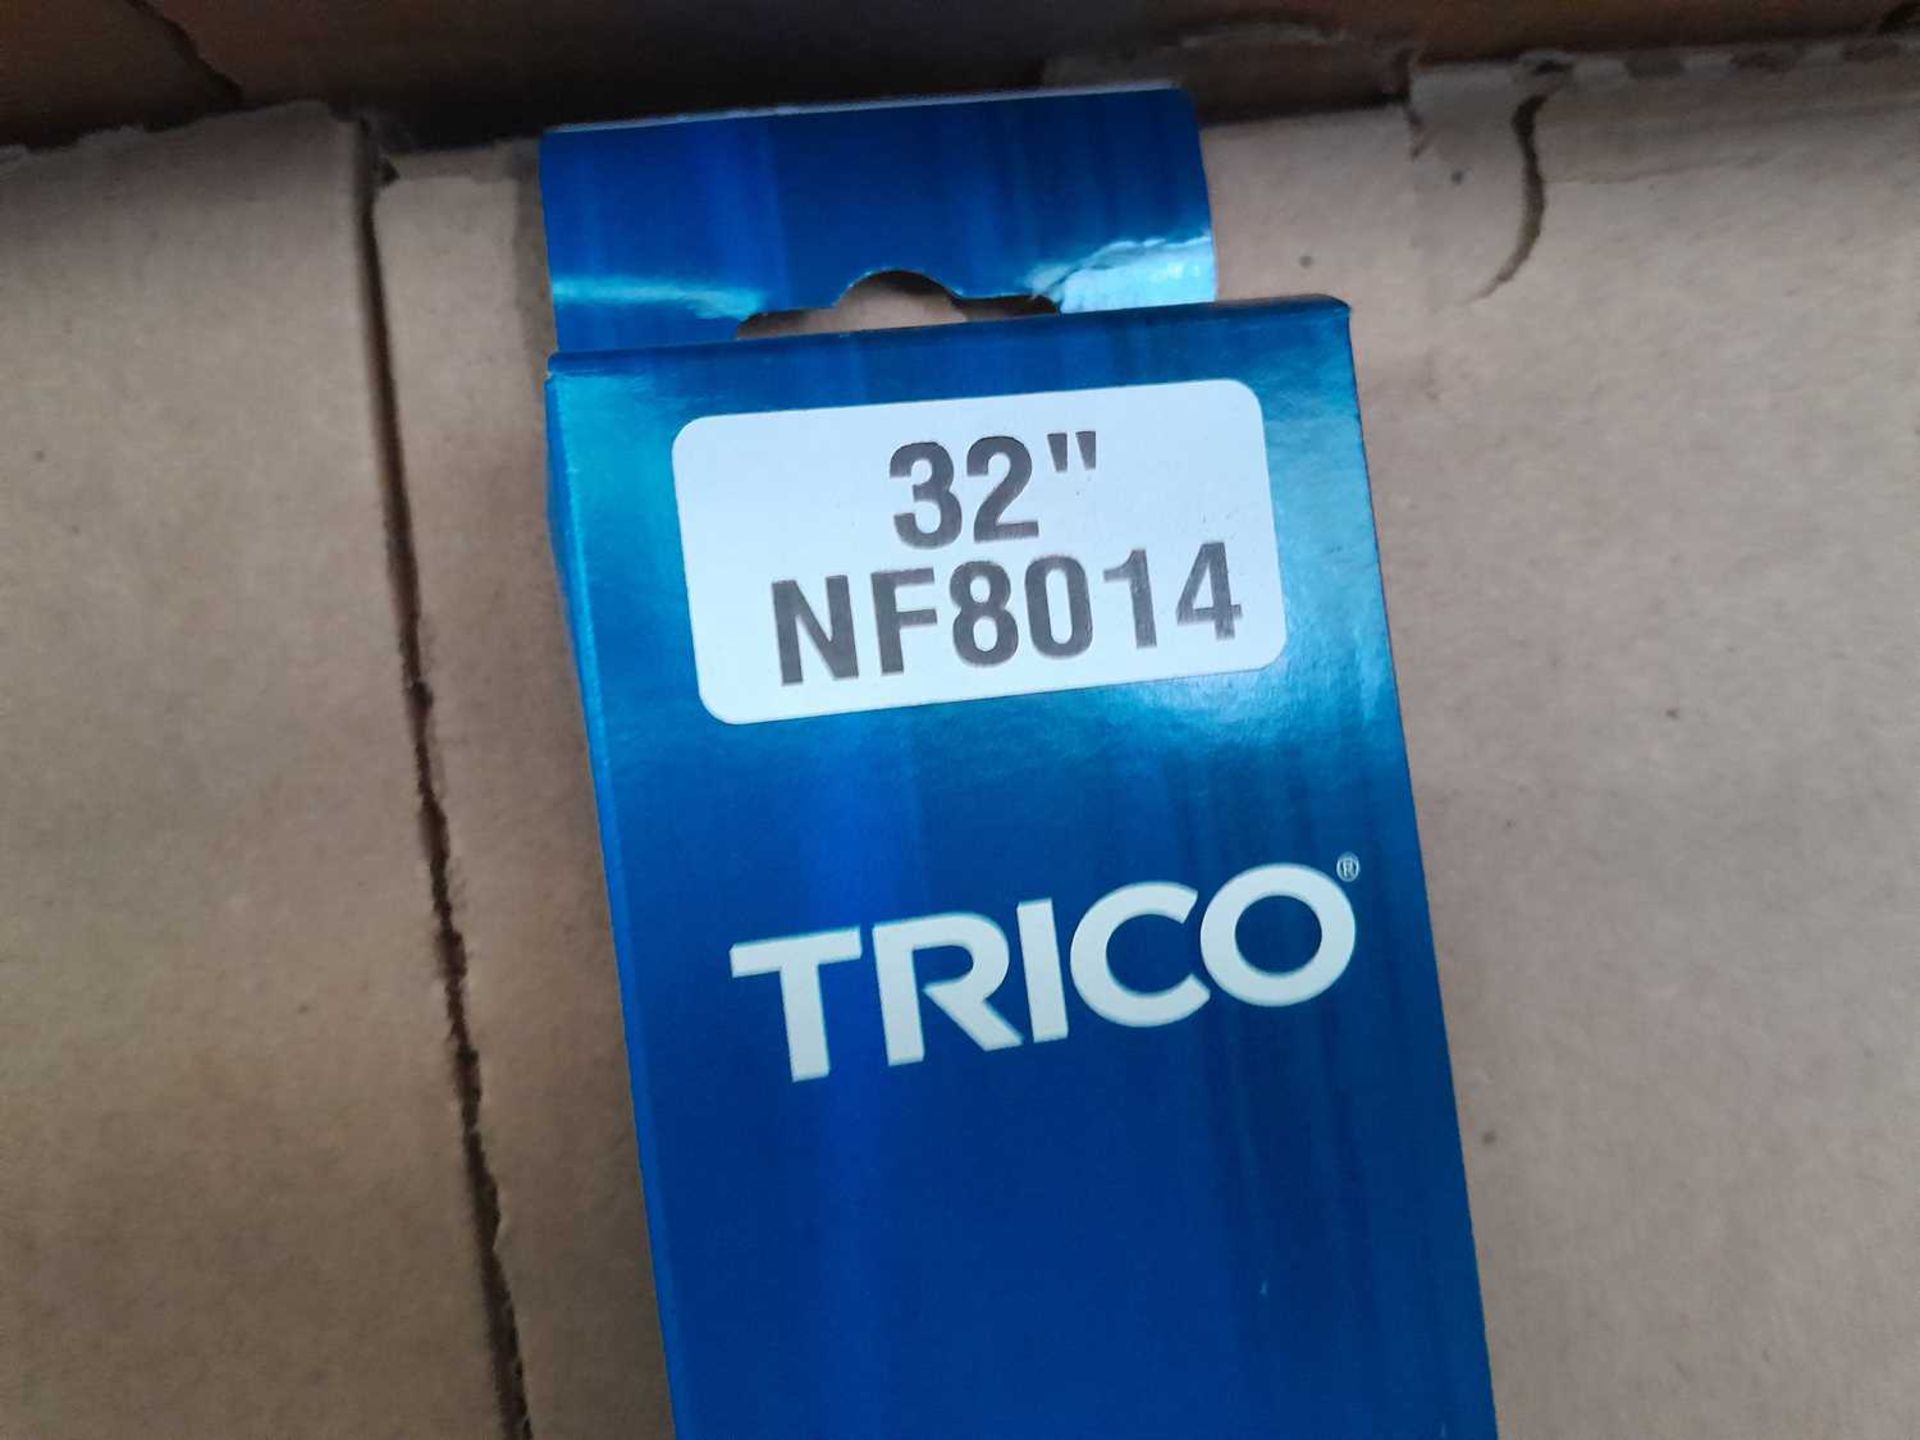 Unused Pallet of Trico NF8014 Windscreen Wipers (32") - Image 2 of 3